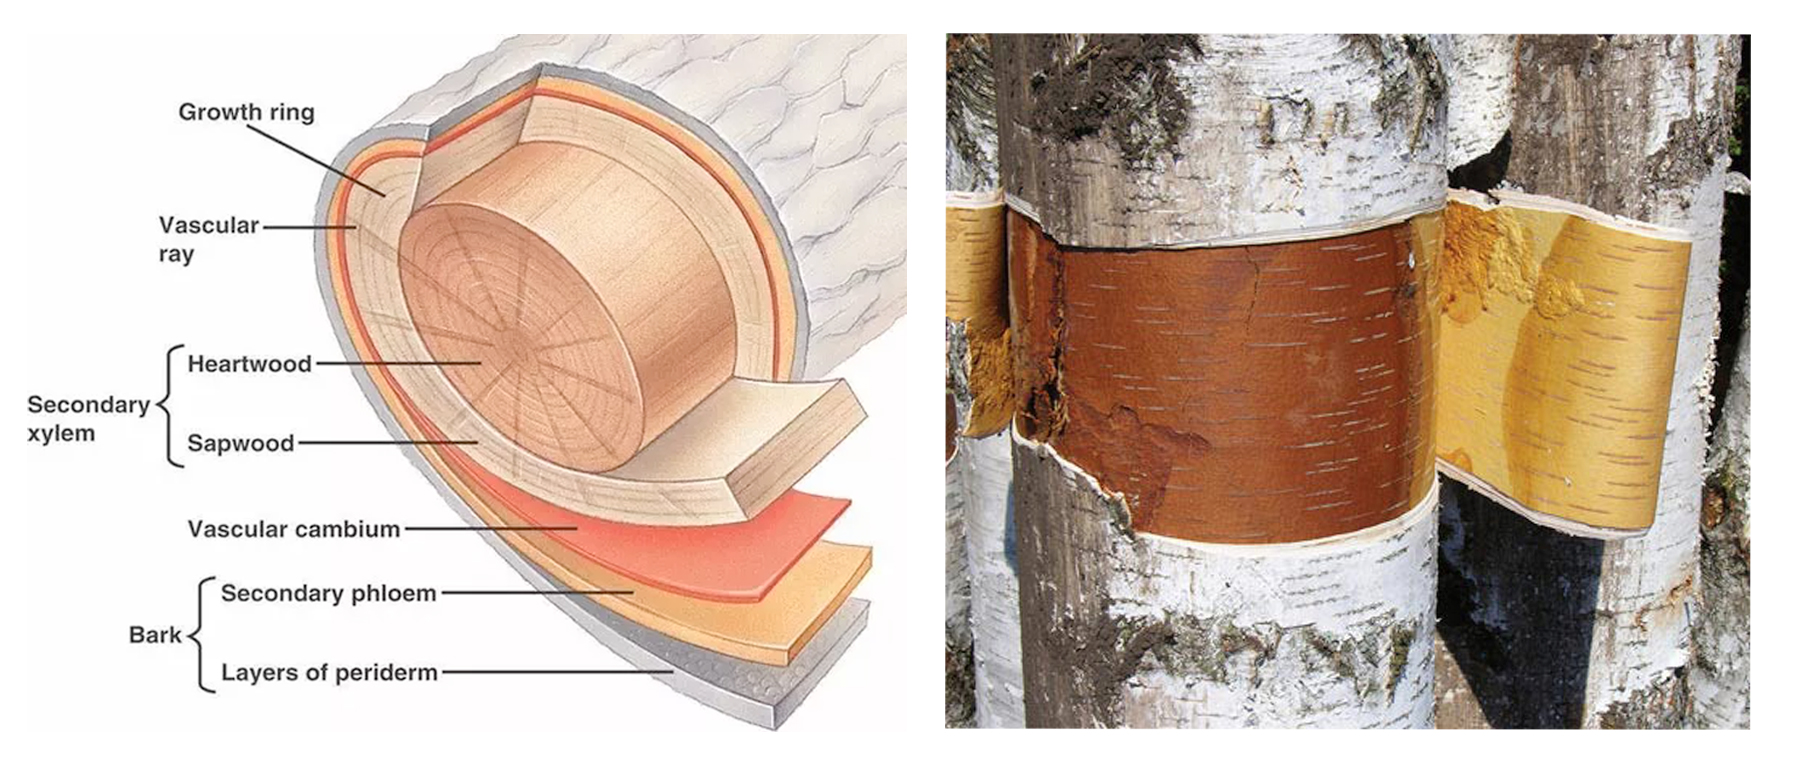 Diagram showing the Birch bark Layers